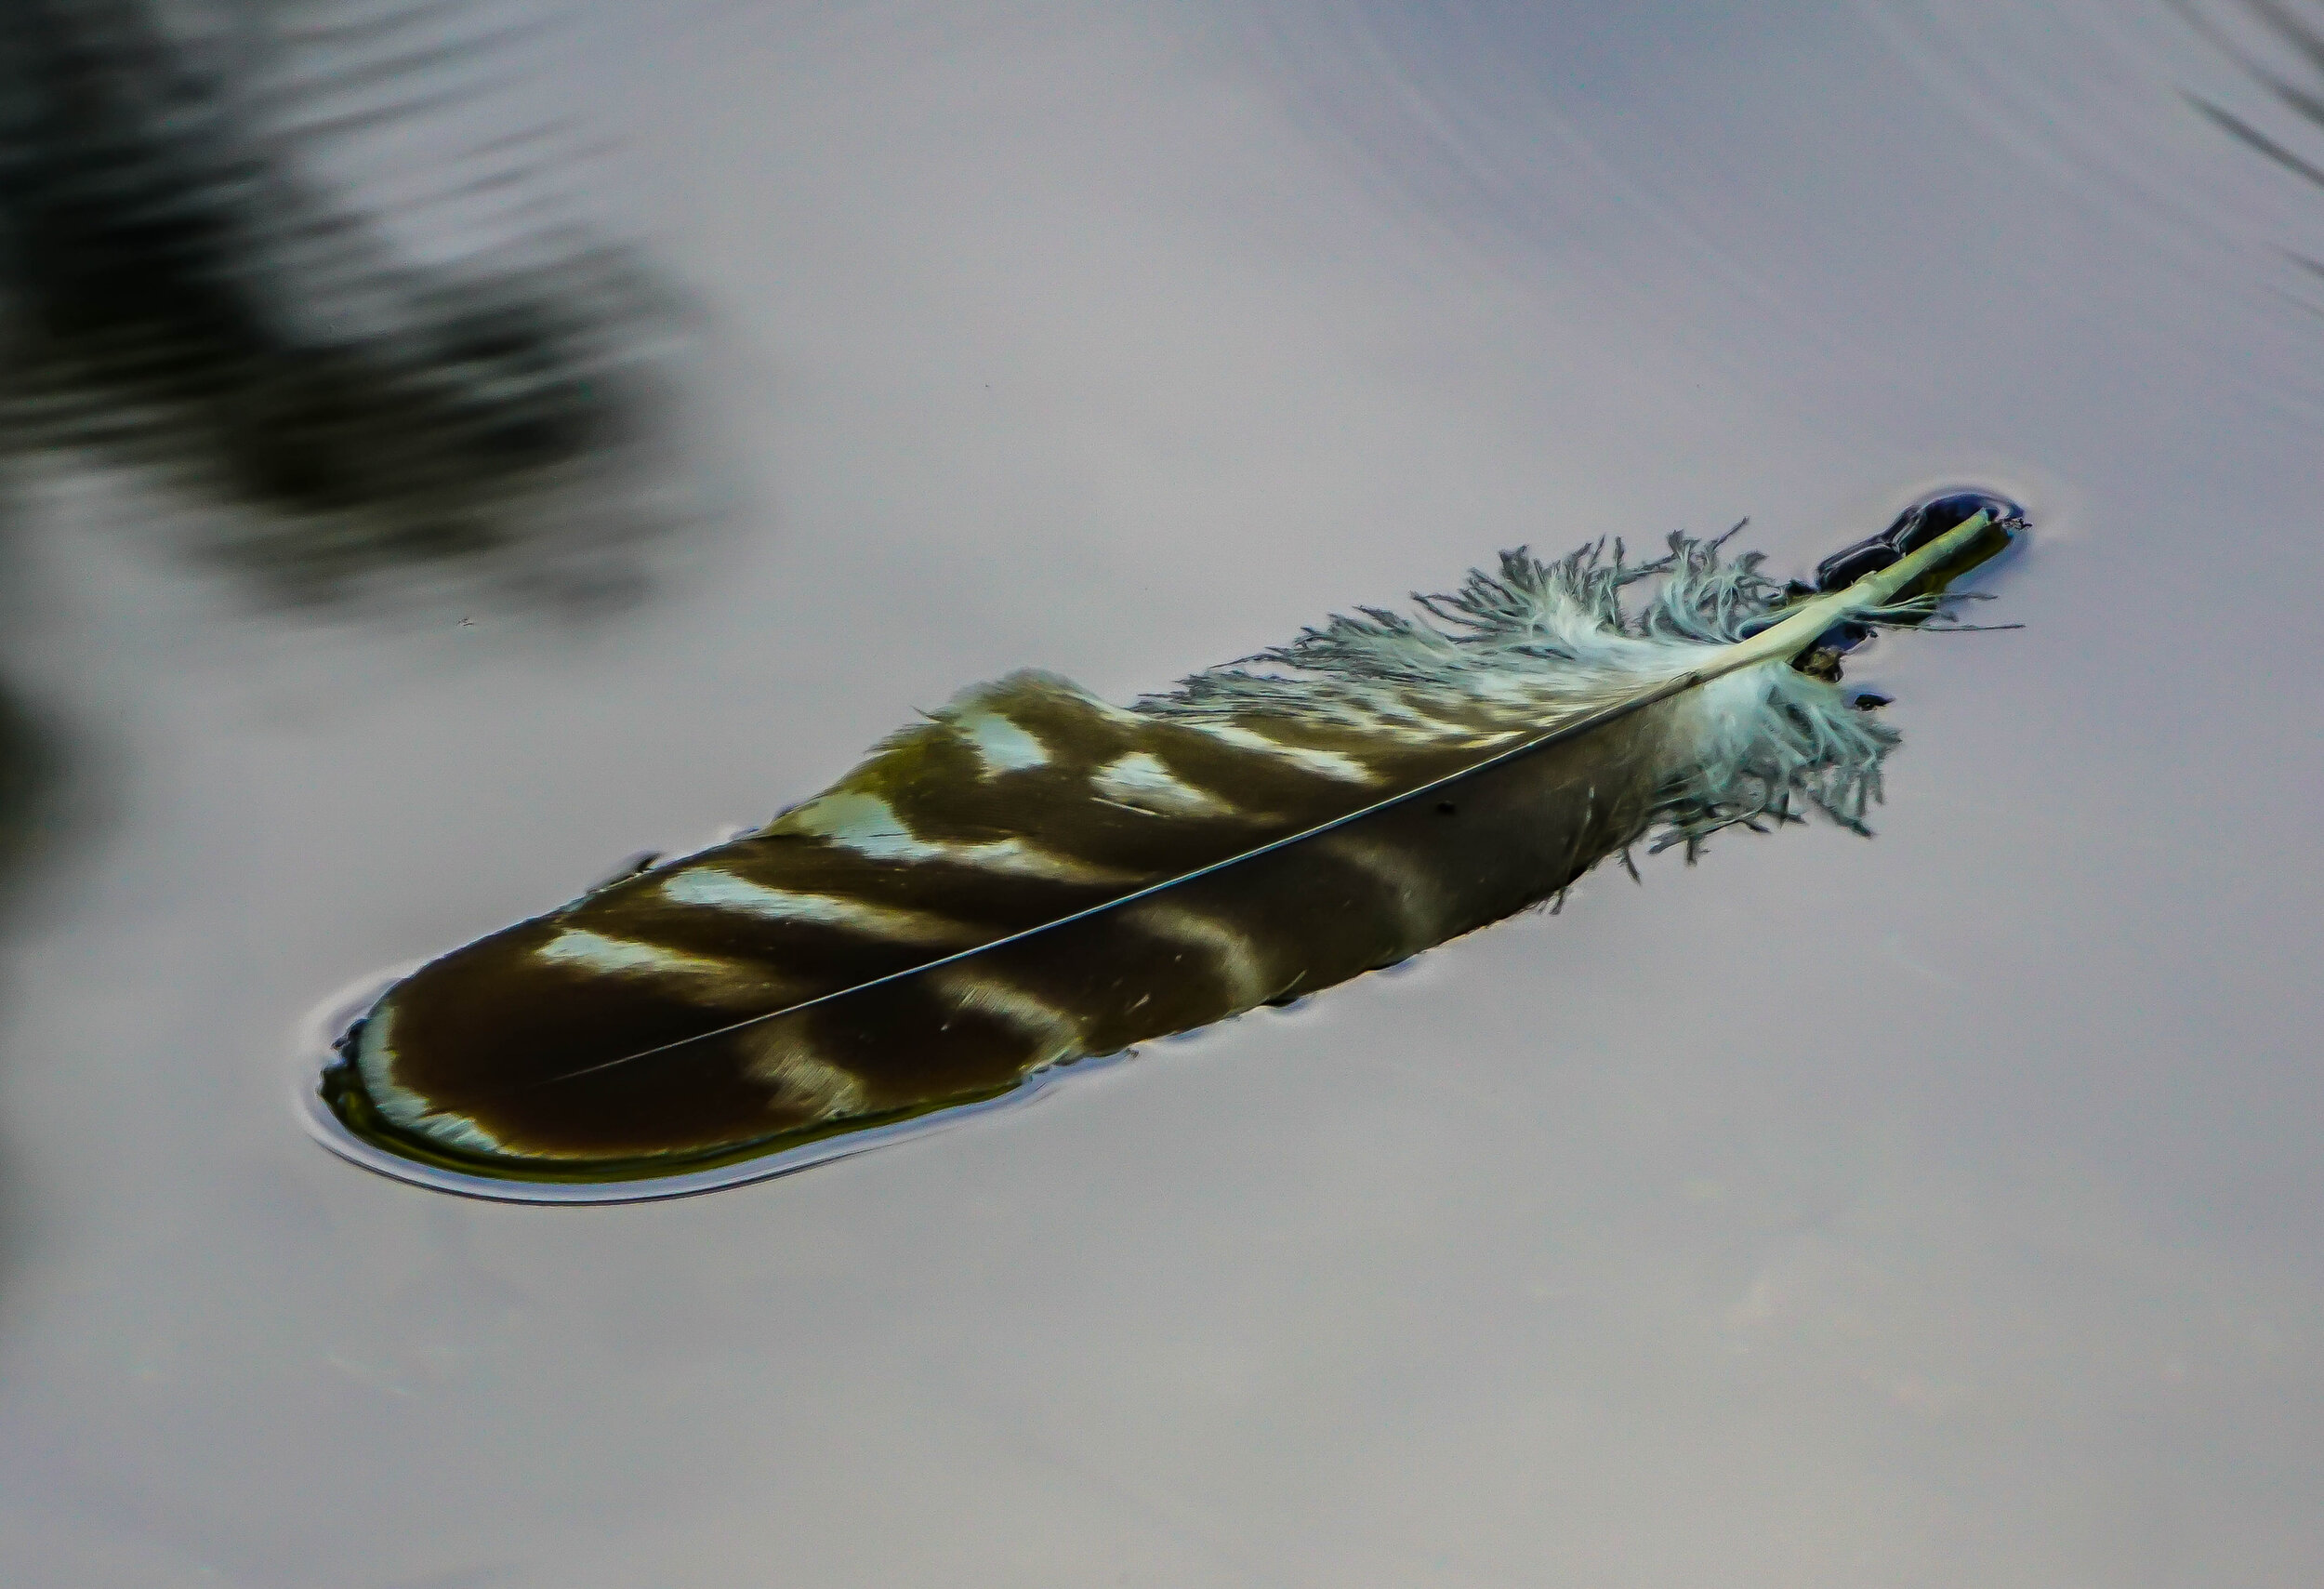 Floating Feather